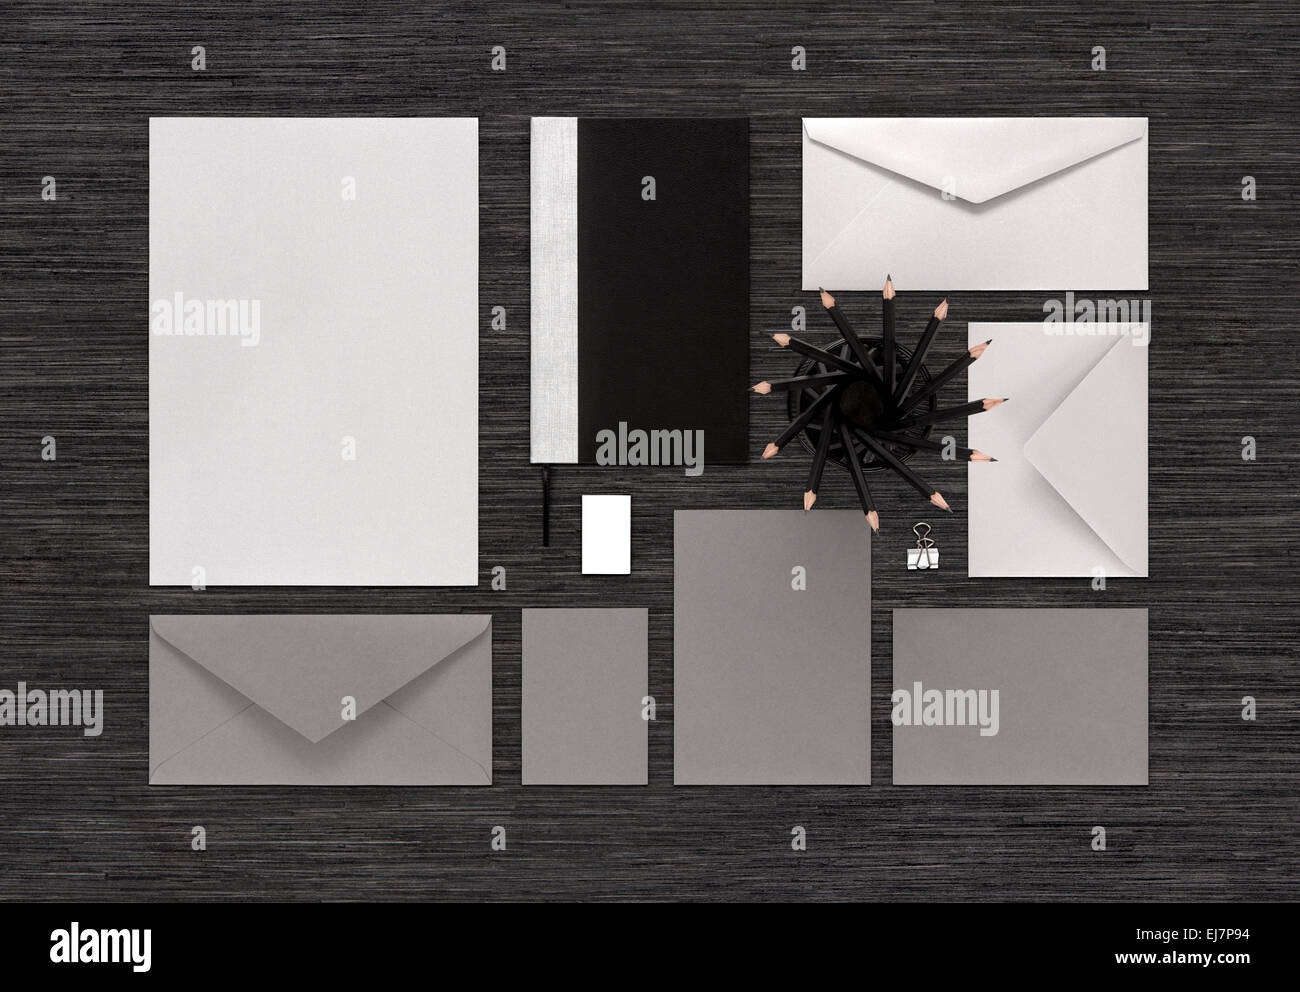 Top view of template for corporate branding identity for design presentation or portfolio on black table. Stock Photo